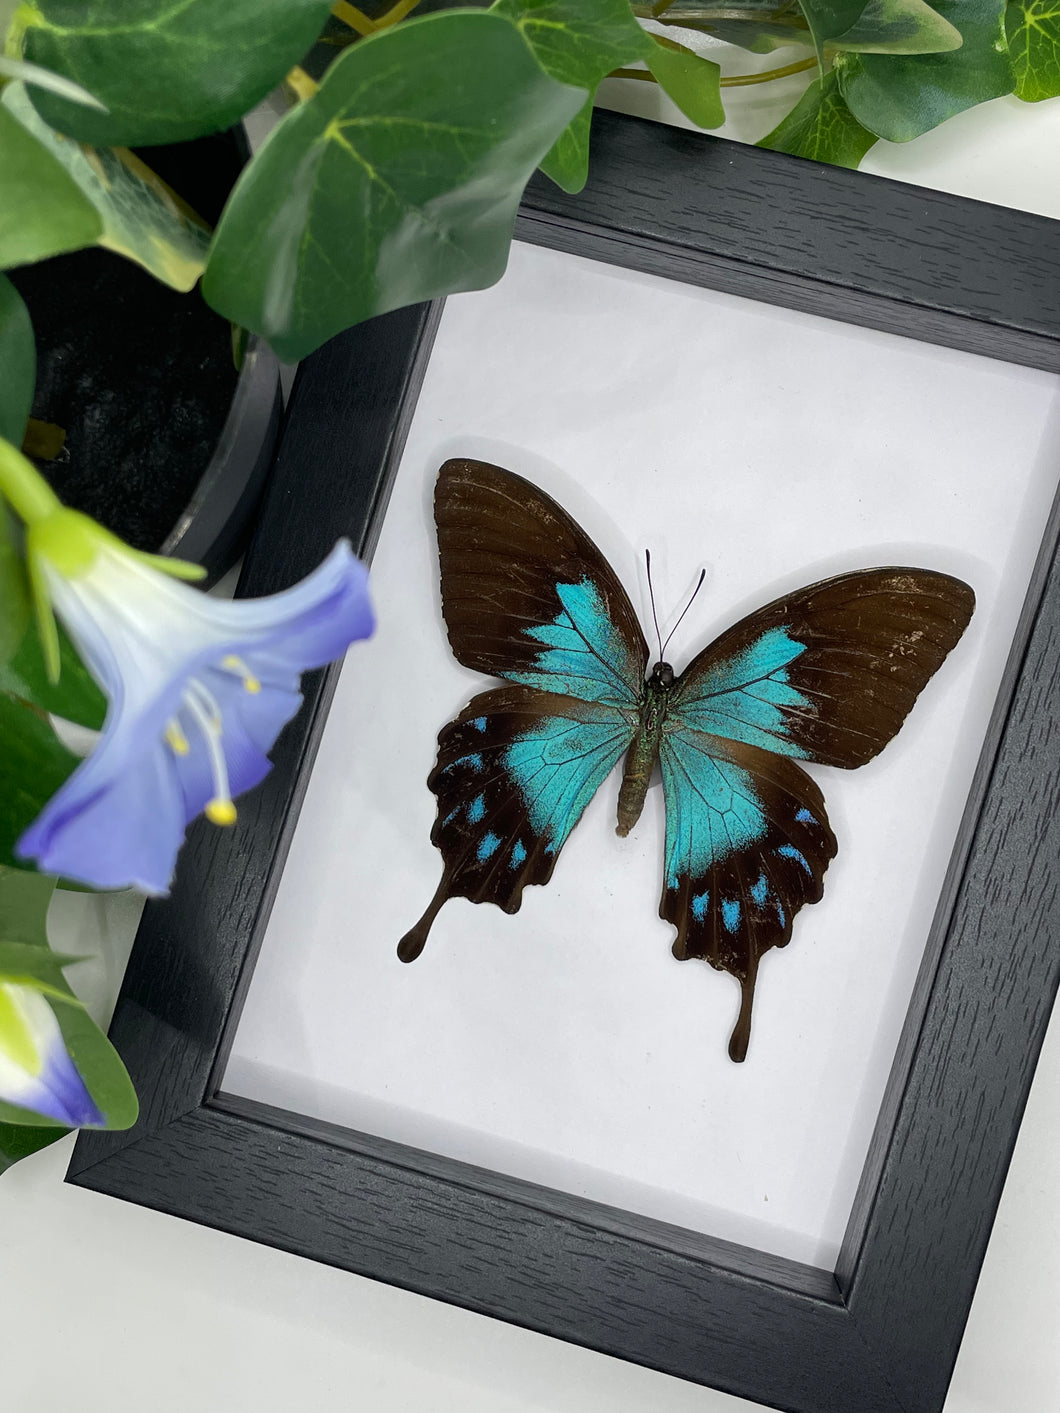 Papilio Ulysses Telegonus / Blue Emperor Swallowtail Butterfly in a frame | Female (A-) #4